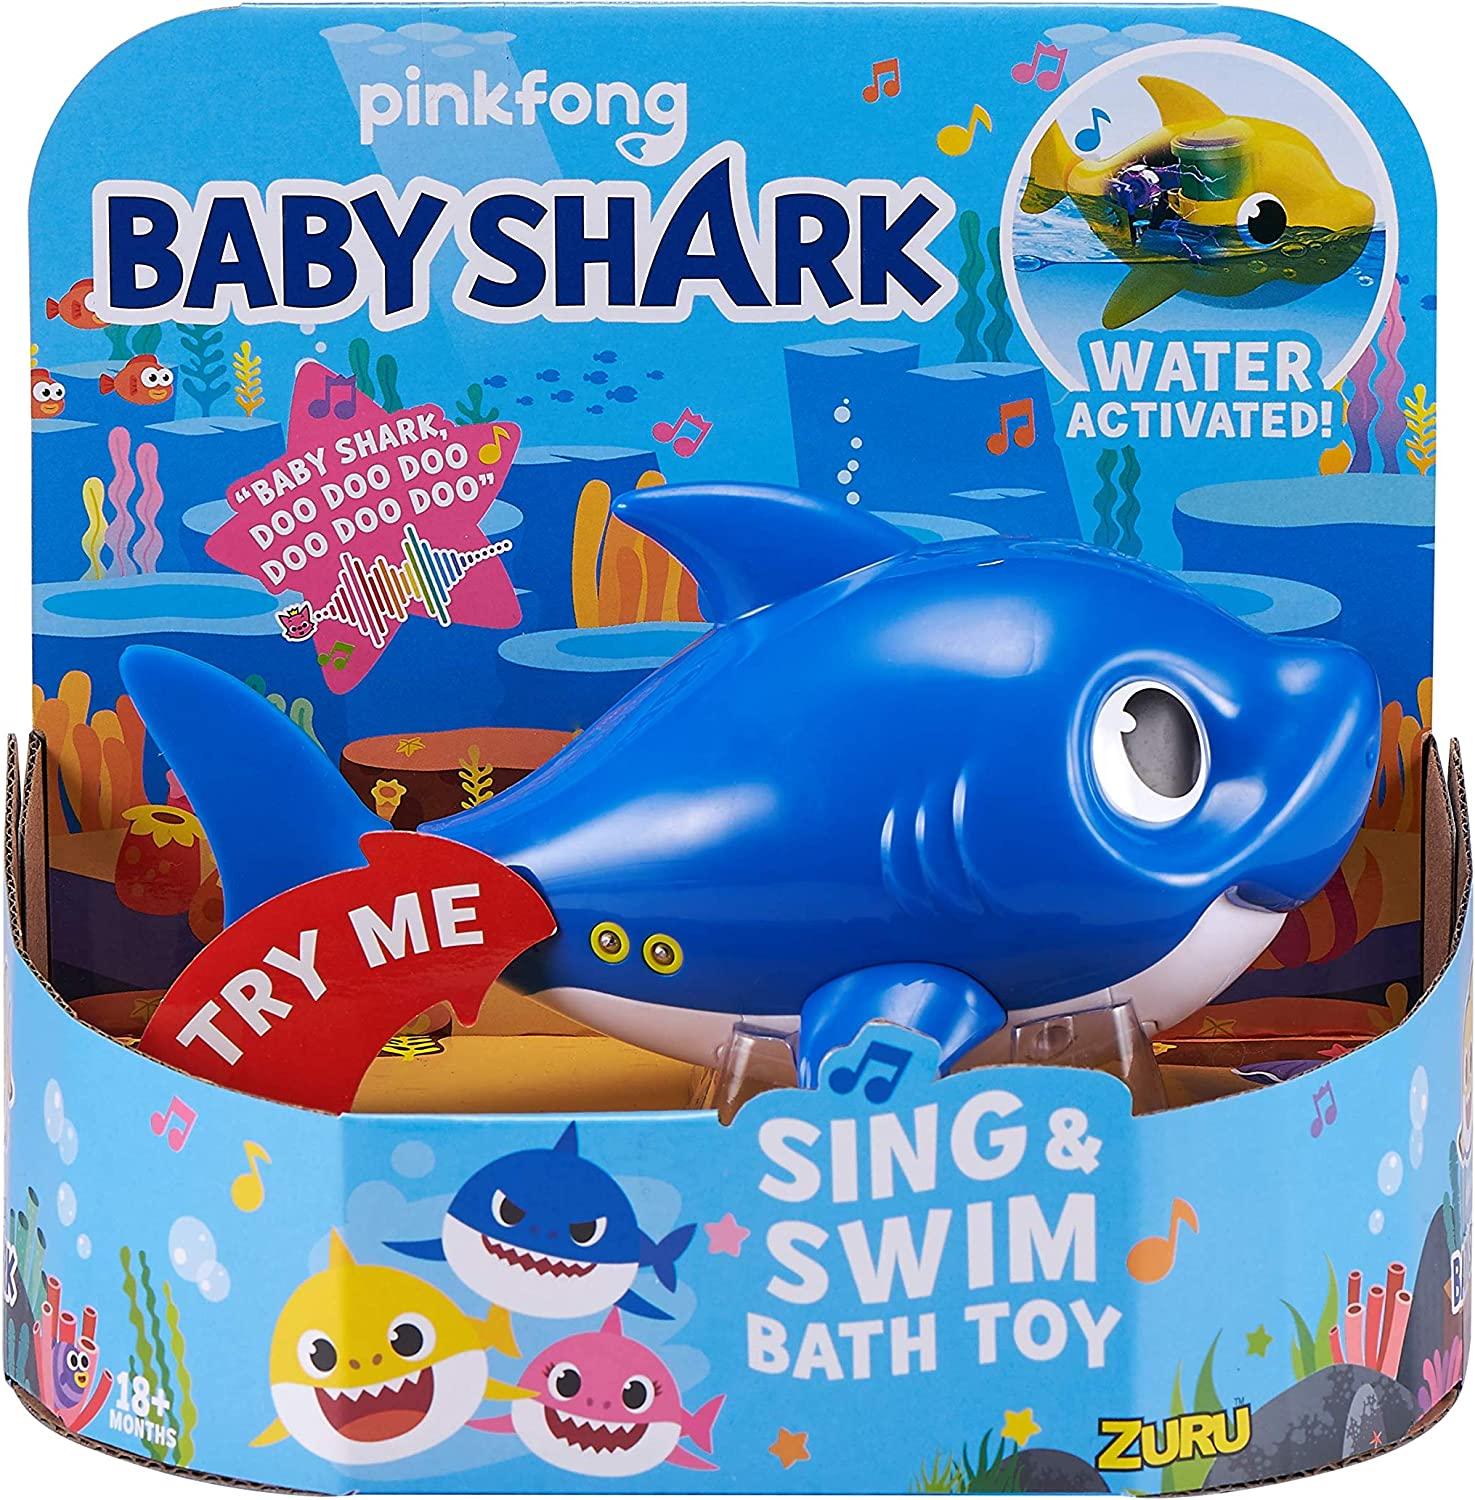 7.5 million Baby Shark bath toys have been recalled after causing